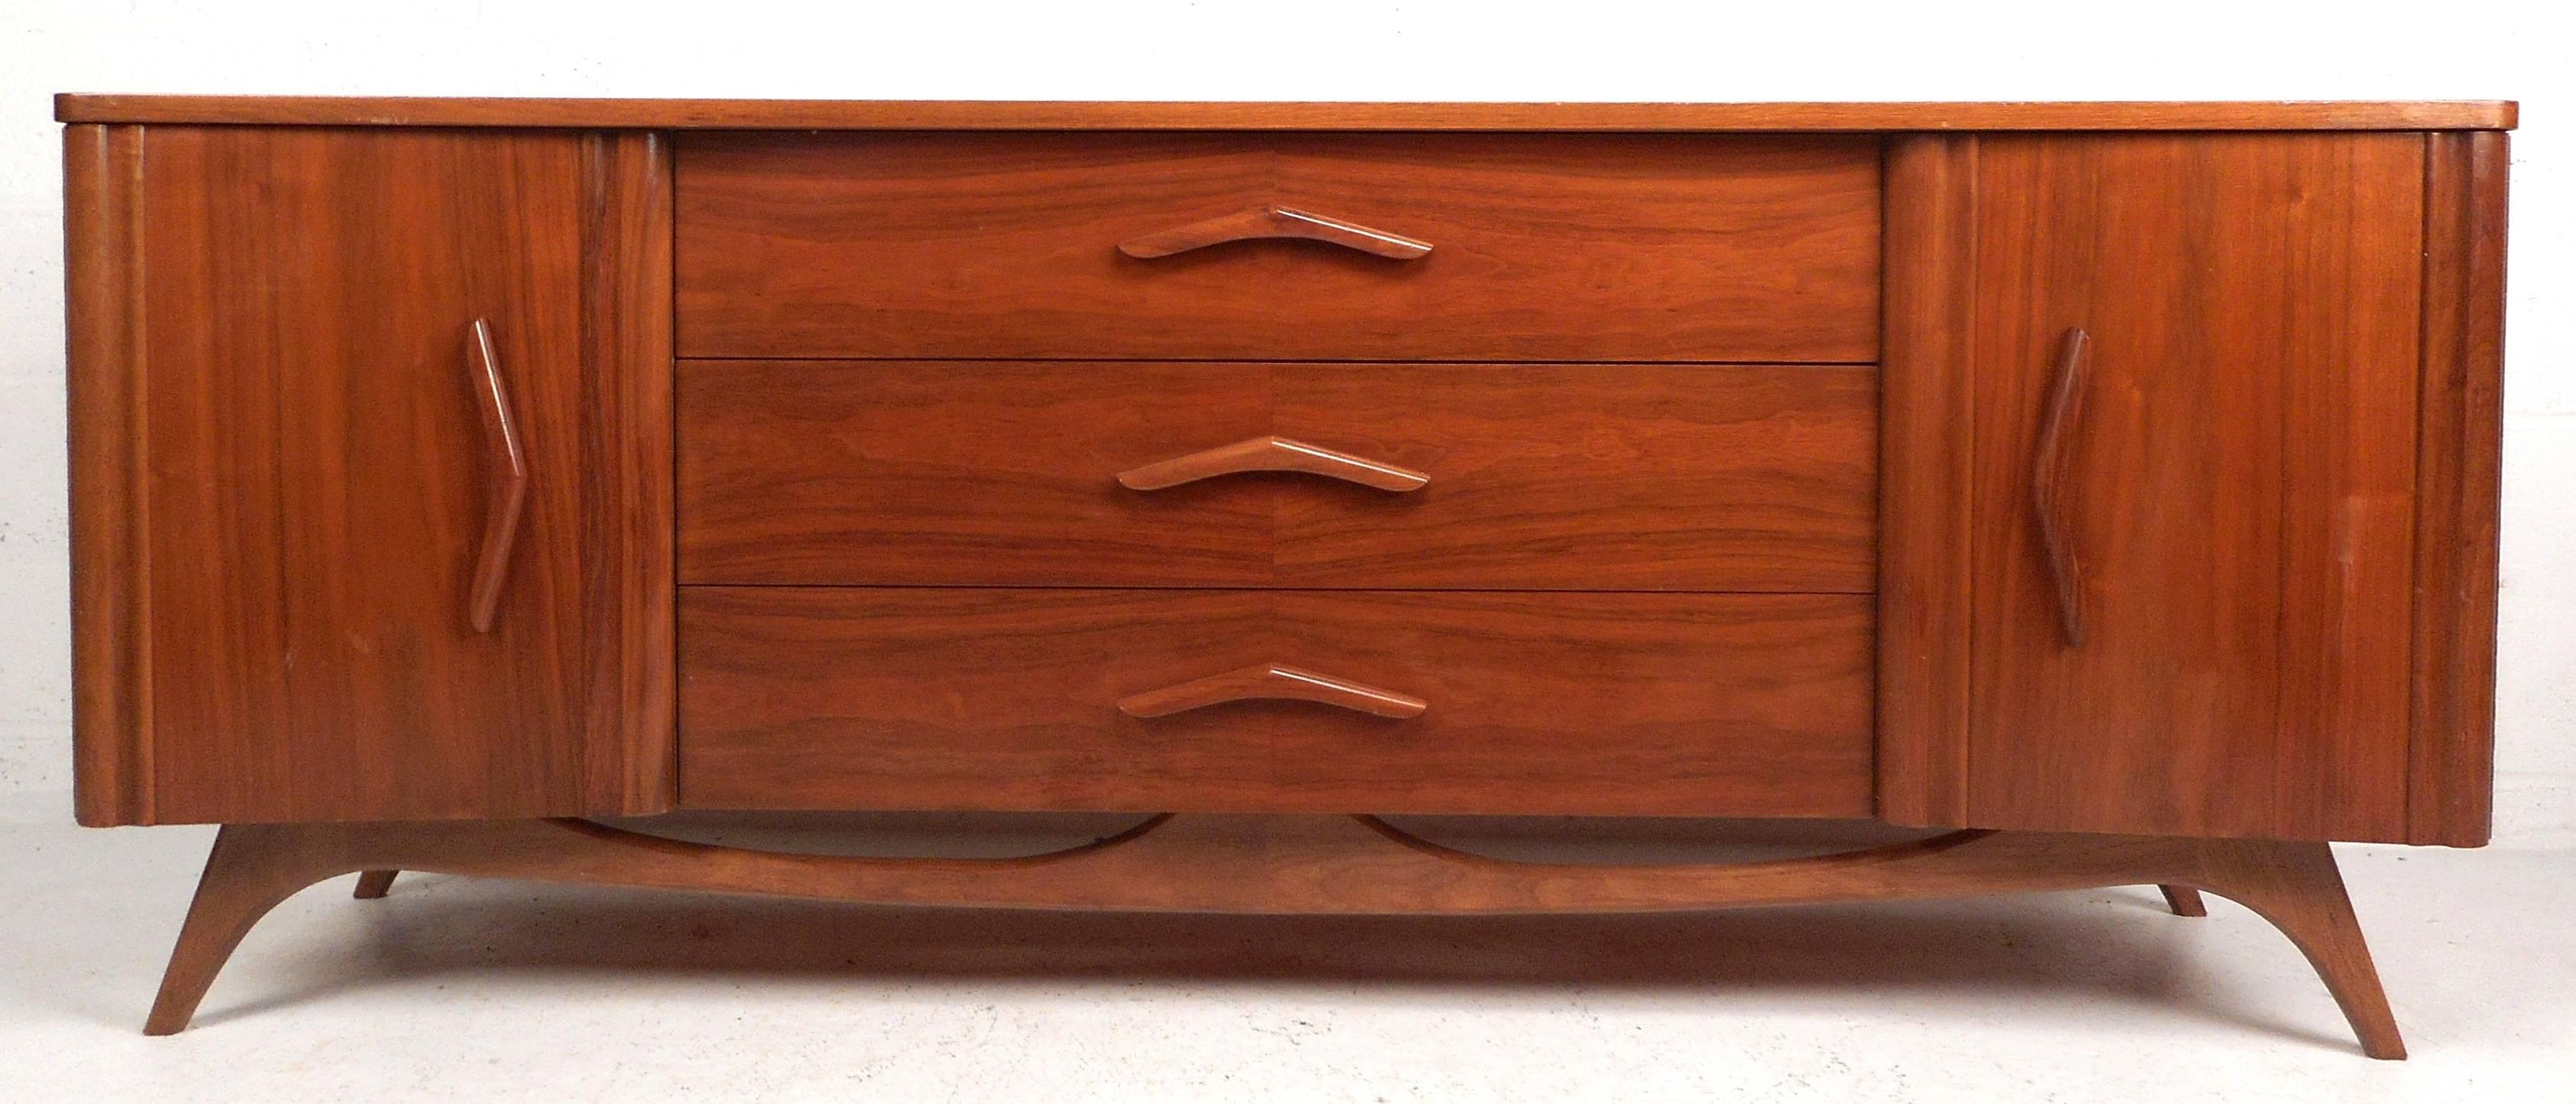 Impressive vintage modern curved front dresser features nine hefty drawers providing plenty of room for storage. Sleek design with carved pulls and a unique sculpted base. Sturdy construction and beautiful walnut wood grain make this bedroom dresser